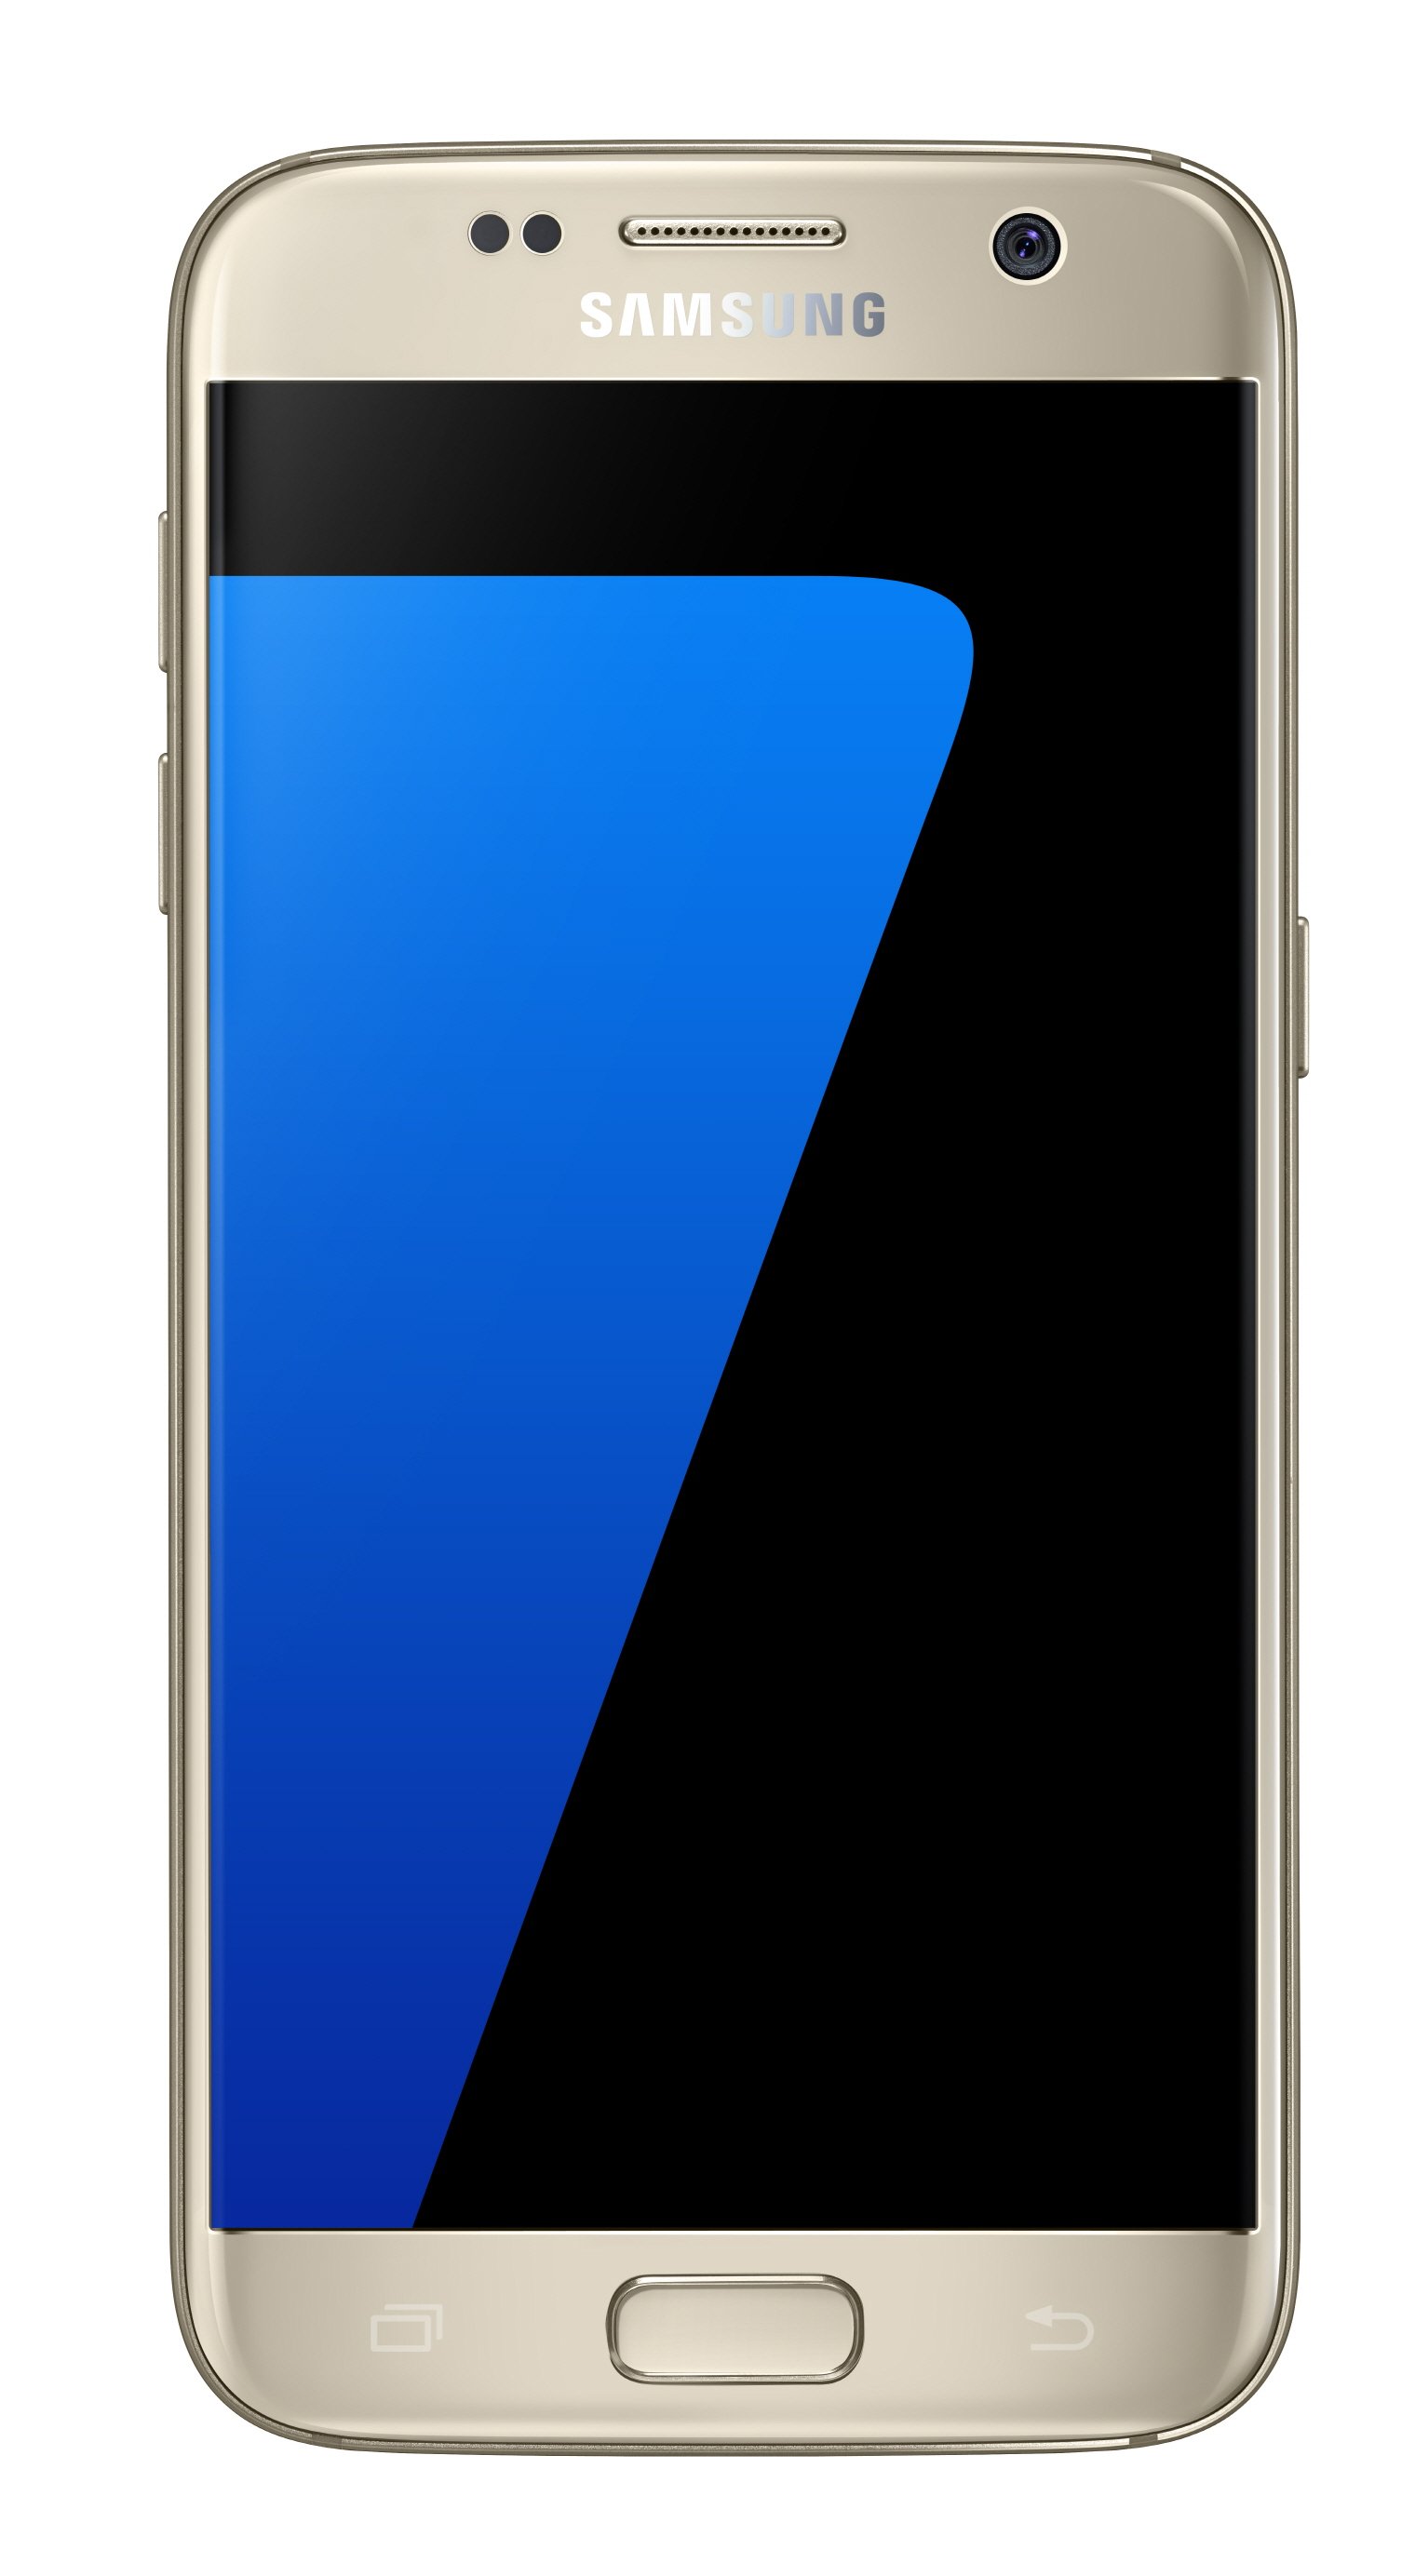 Galaxy S7: Release Date, Specs and Features